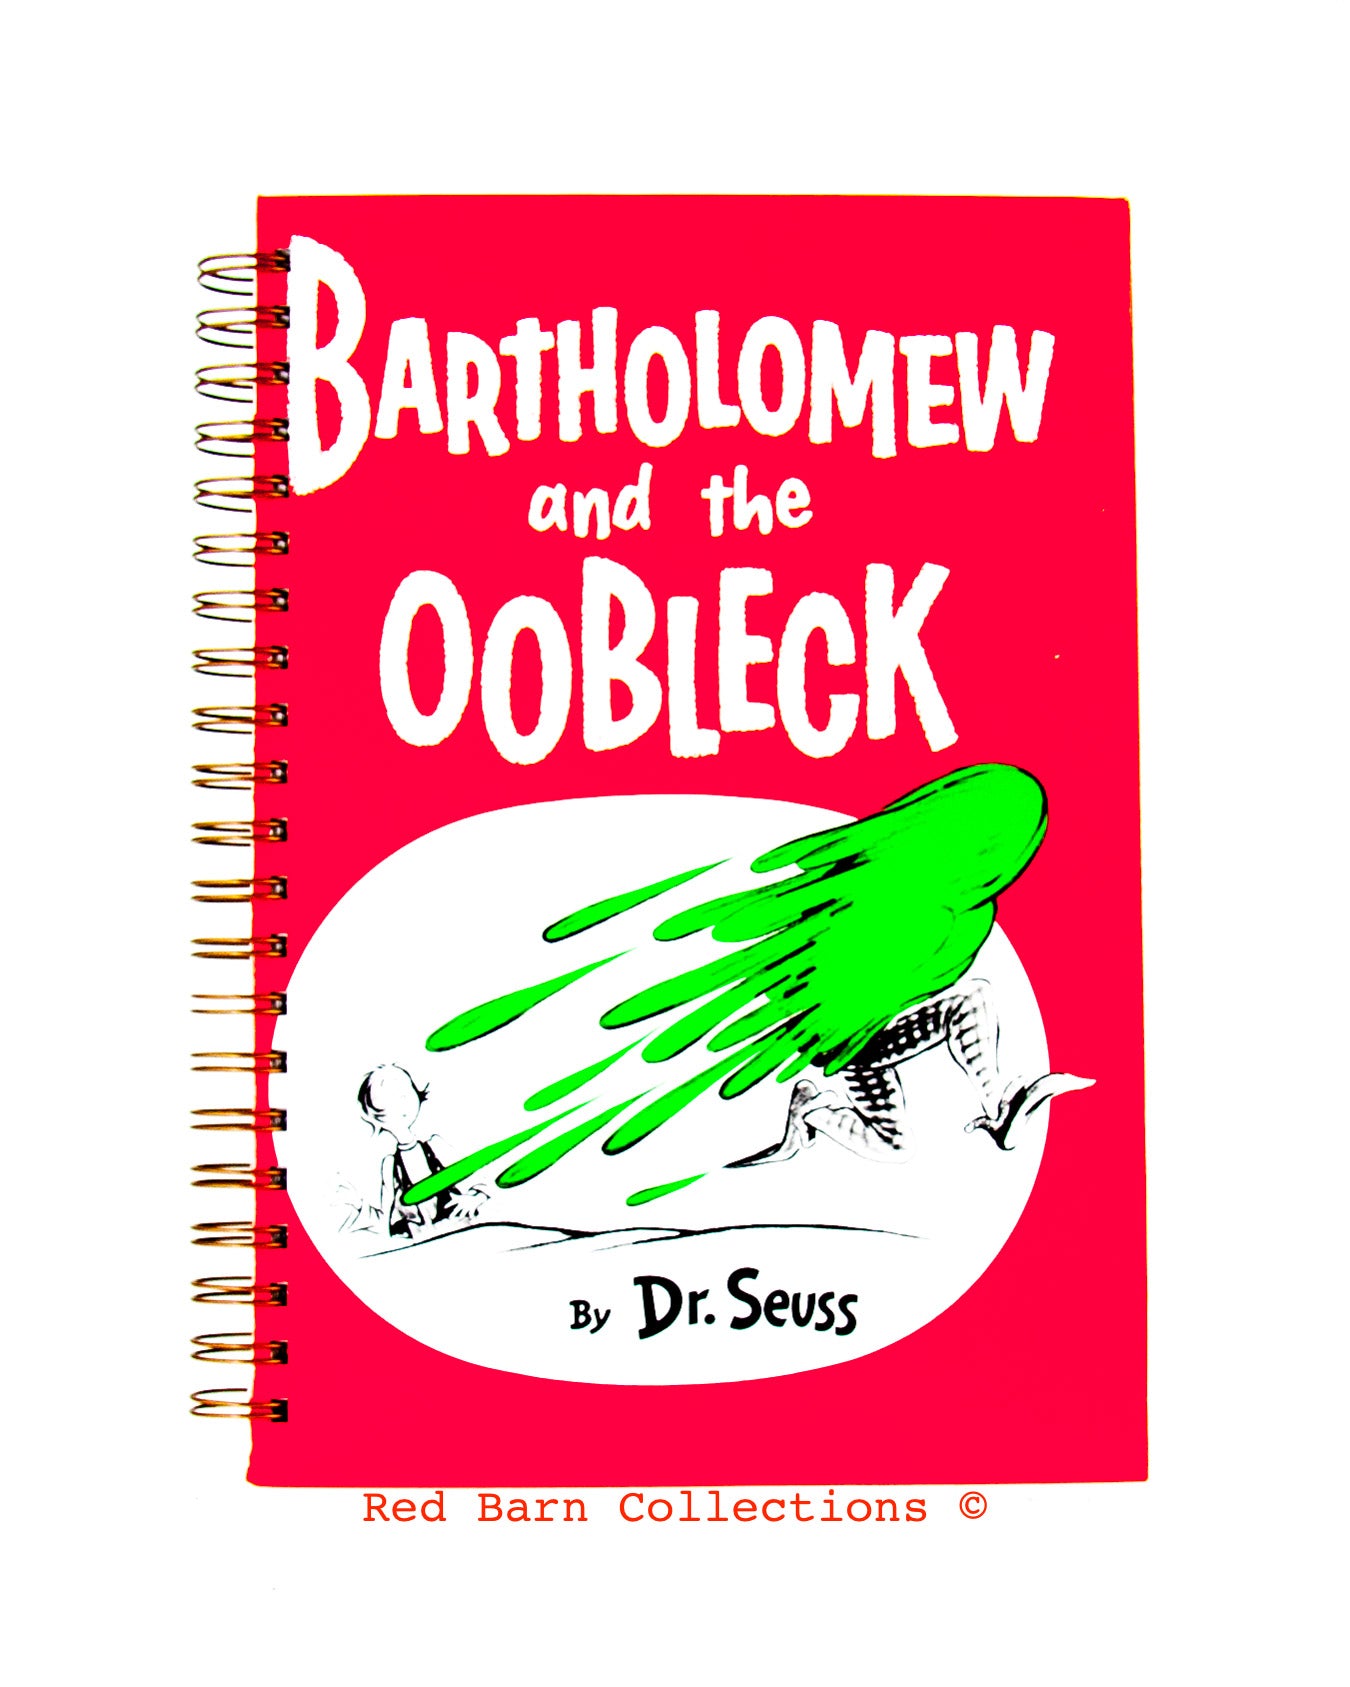 Dr. Seuss - Bartholomew and the Oobleck-Red Barn Collections